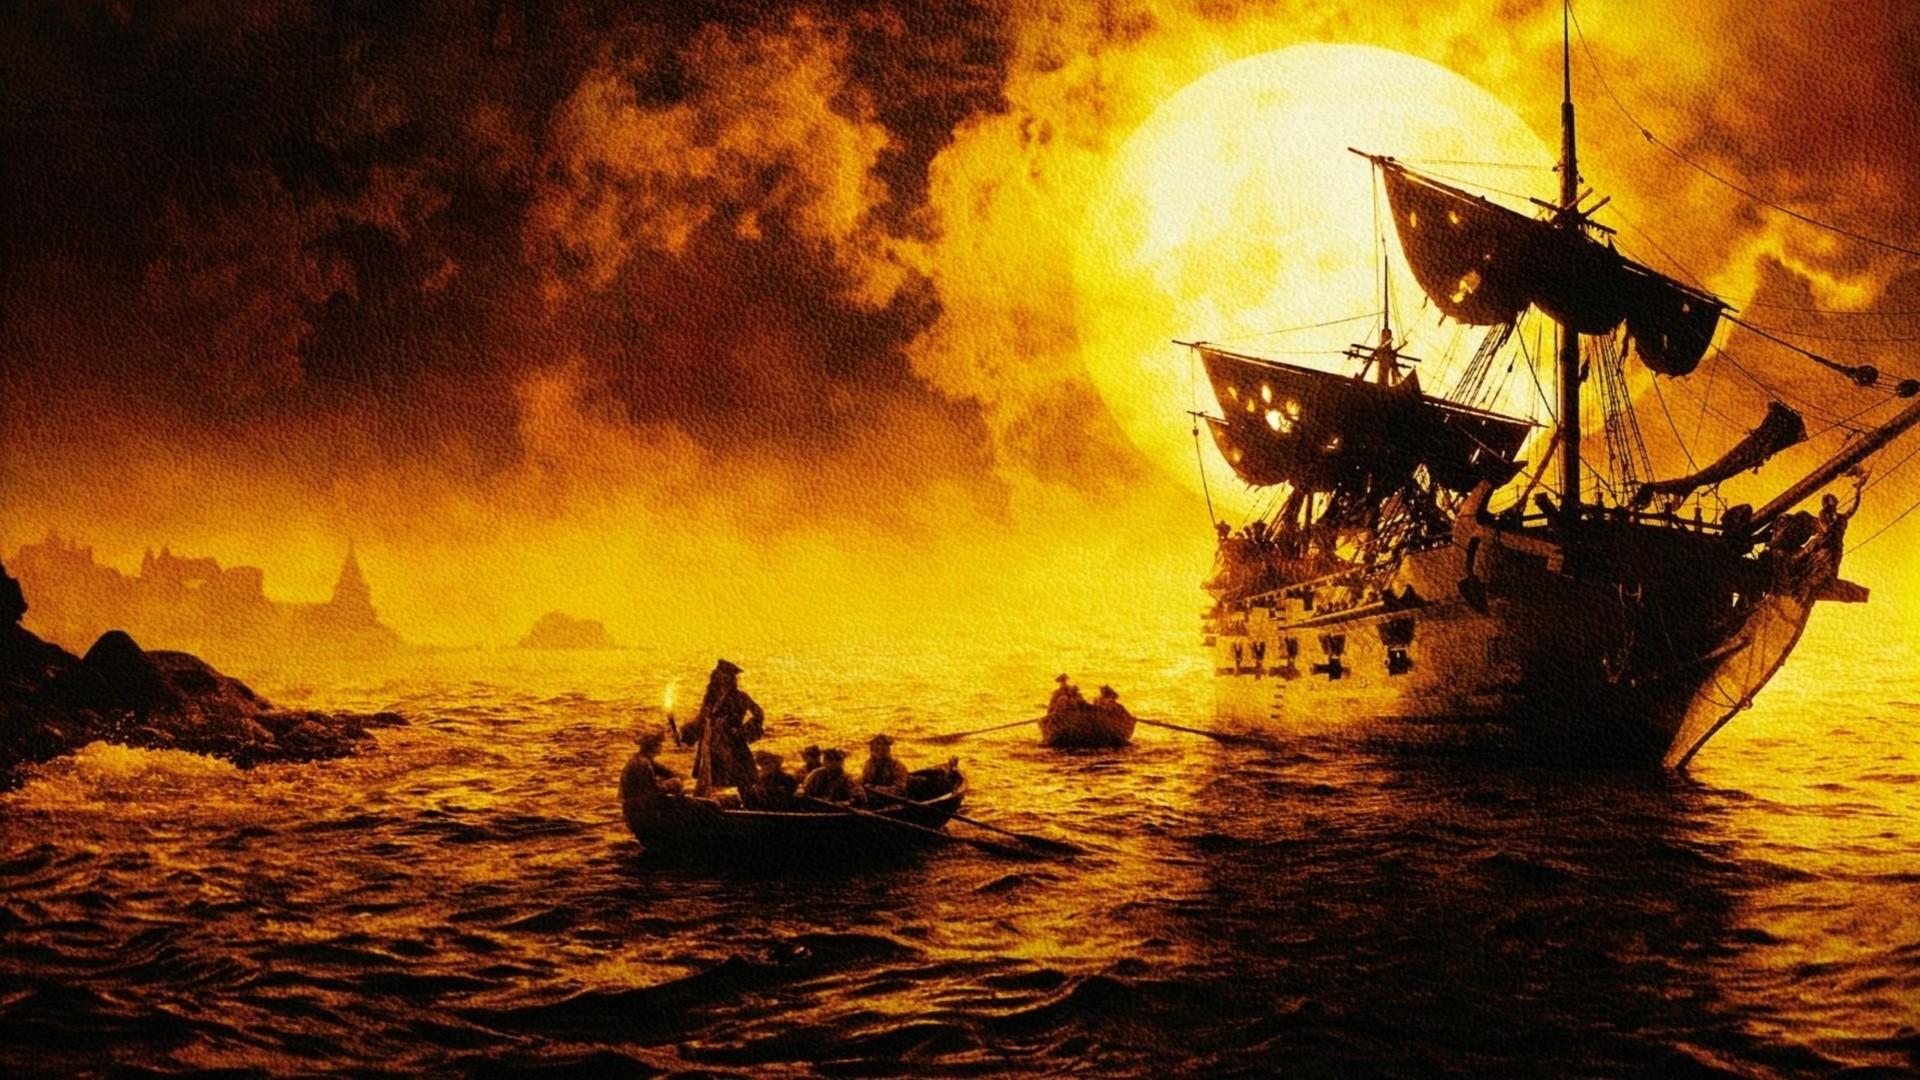 Pirate Ship Wallpaper background picture